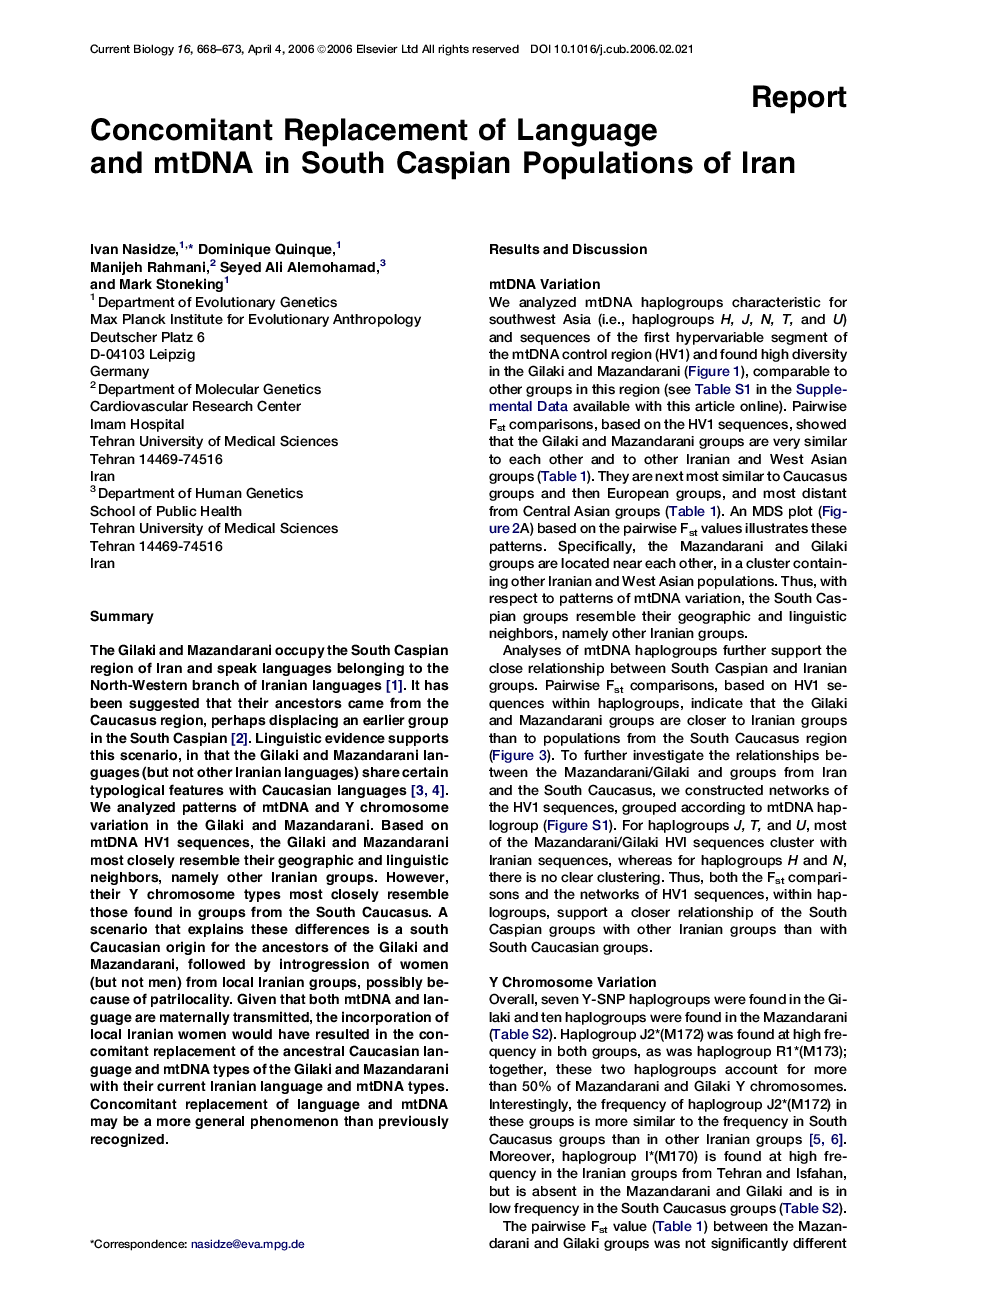 Concomitant Replacement of Language and mtDNA in South Caspian Populations of Iran